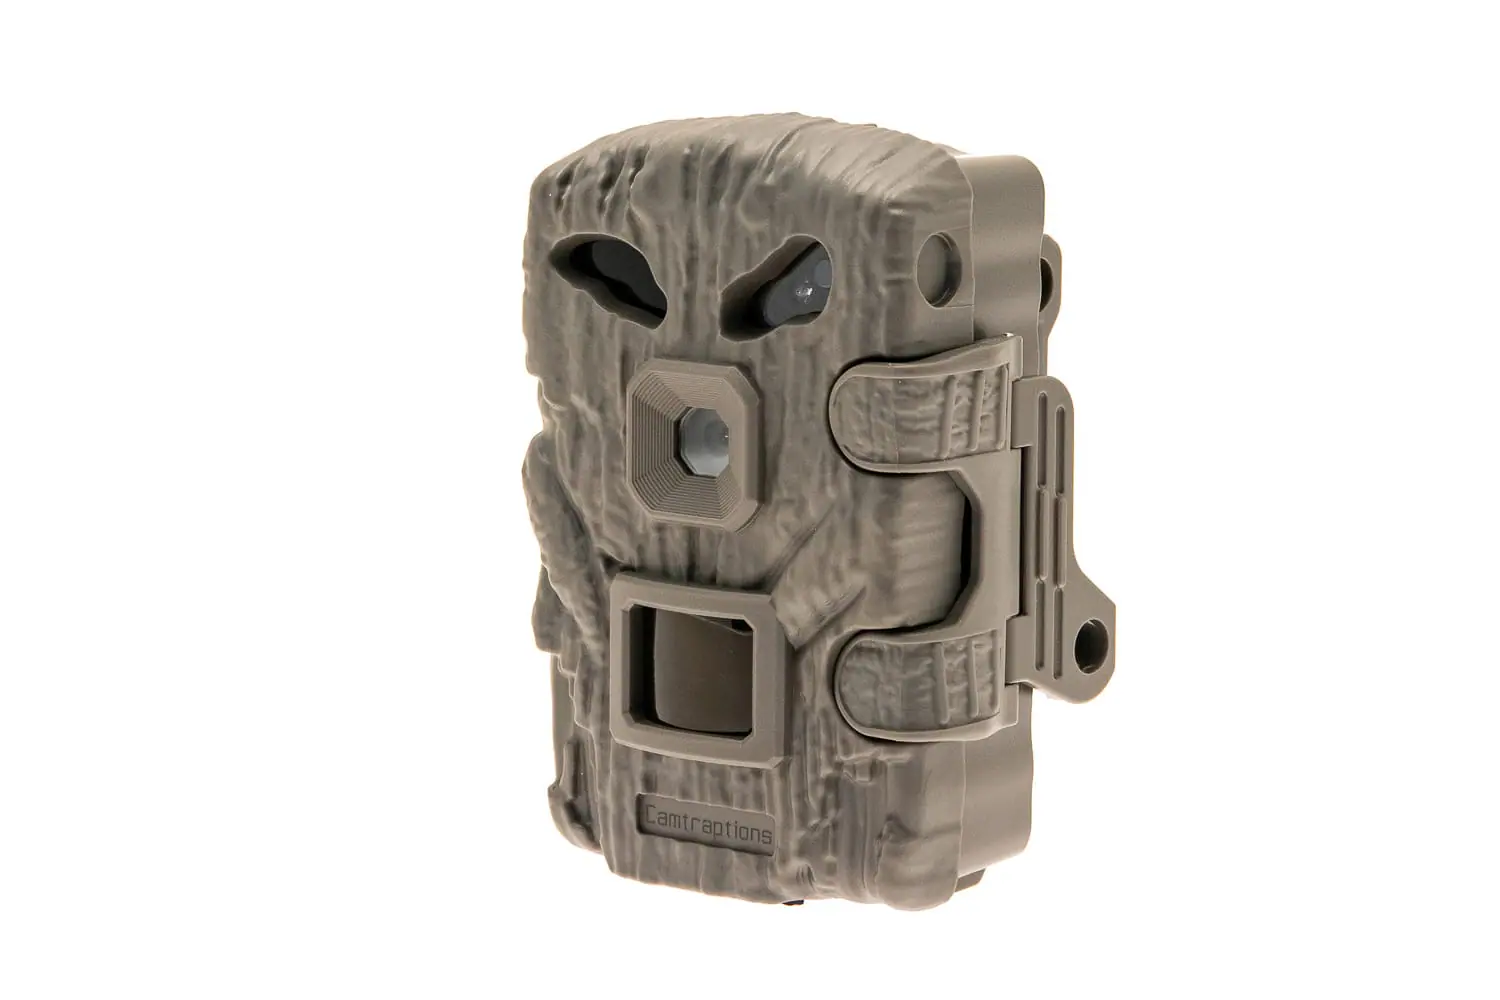 Camtraptions Trail Camera